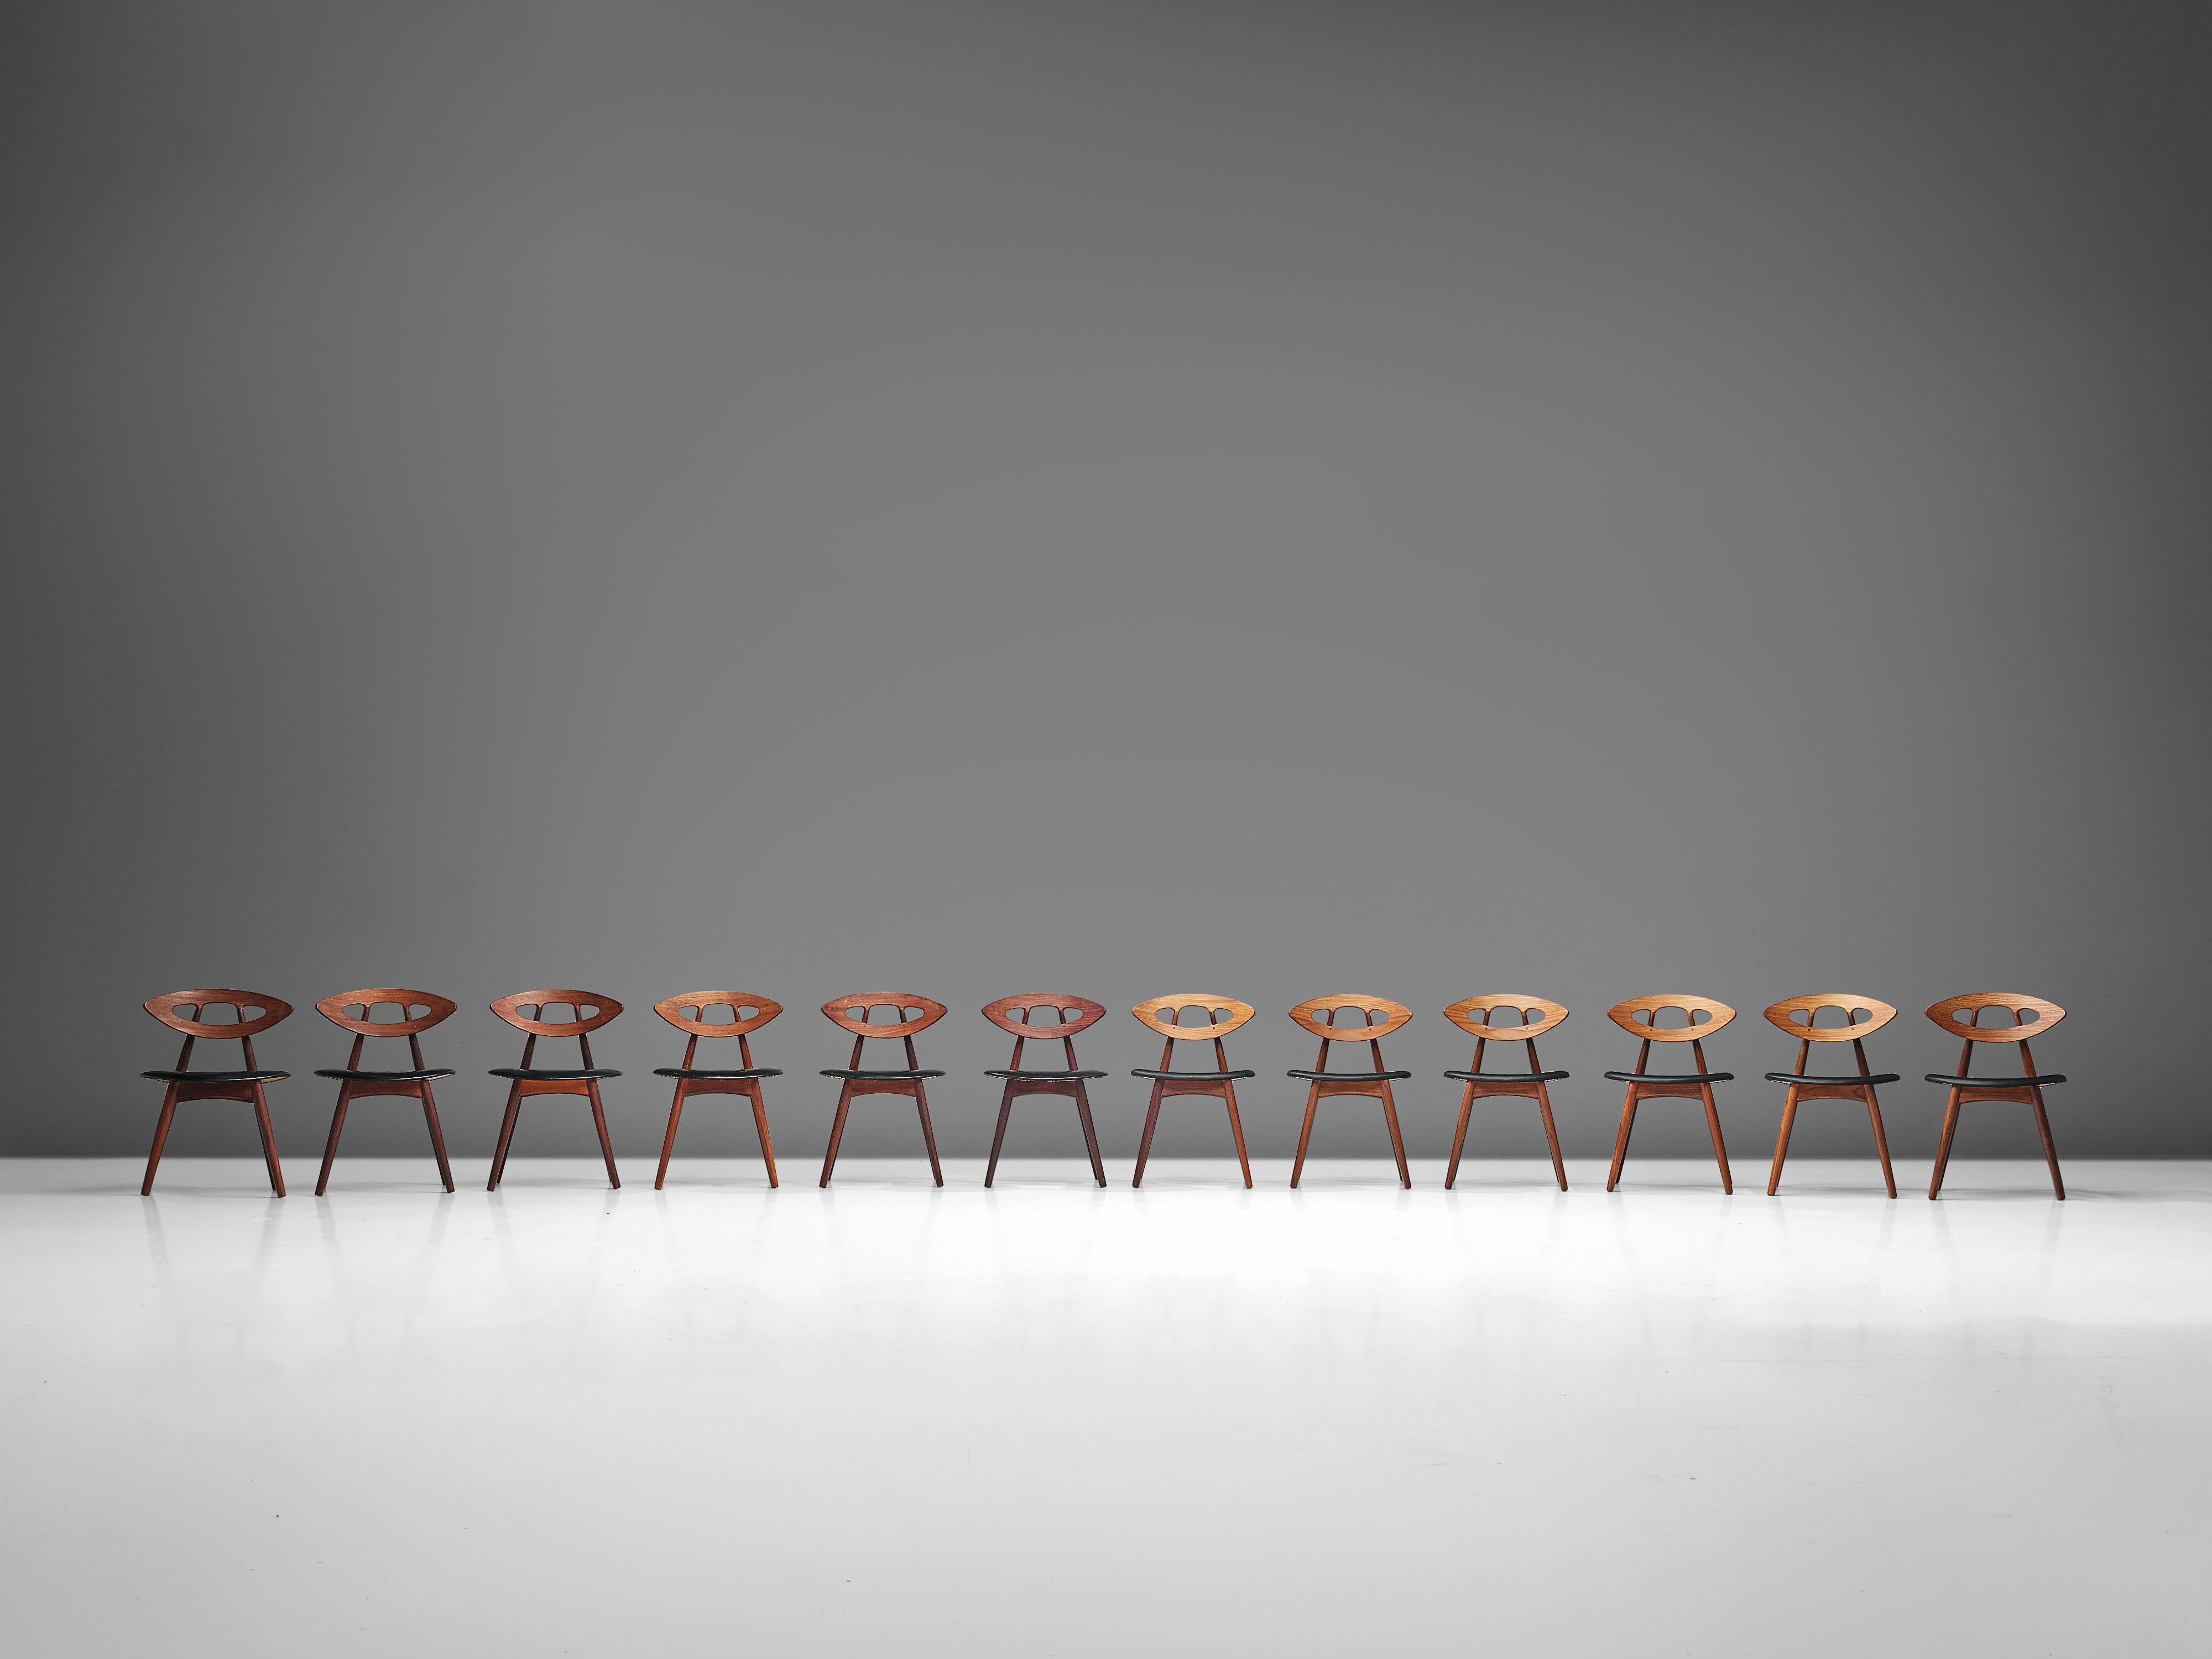 Ejvind A. Johansson, set of 12 dining chairs, ‘Eye’ model ‘84’, teak, black leather, Denmark, designed in 1961

Wonderful and exclusive set of 12 ‘Eye’ chairs by Danish designer Ejvind Johansson. Characteristic is the oval 'eye' shaped backrest.